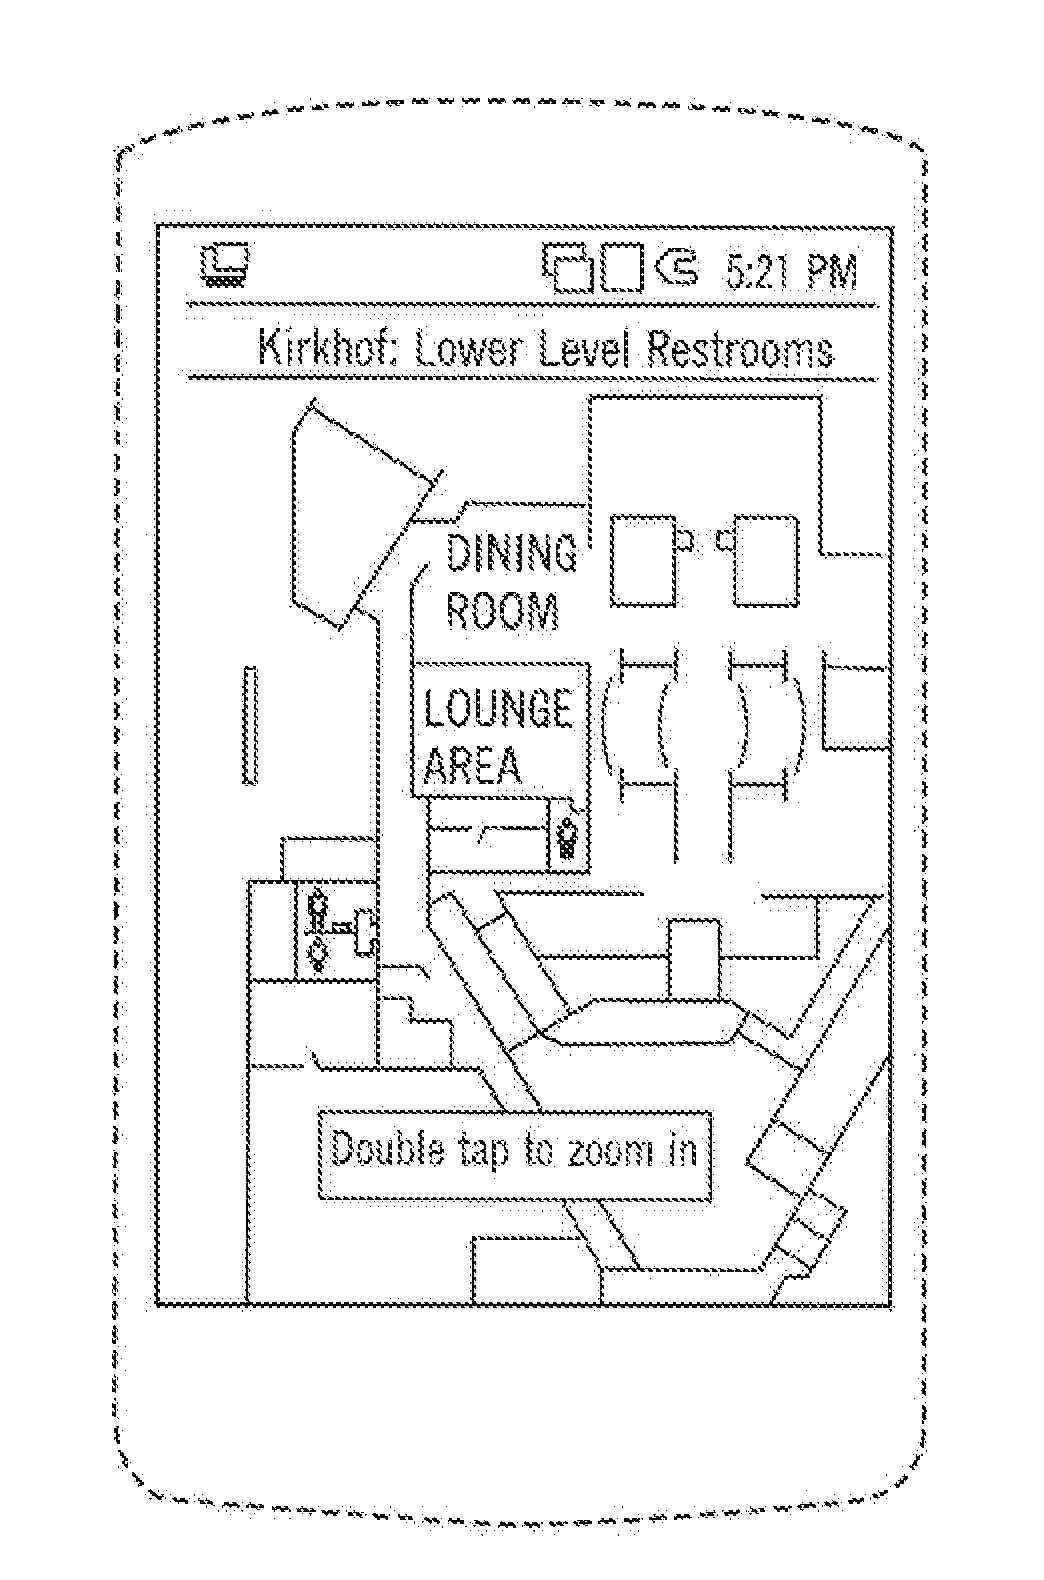 Systems and Methods for Providing Information Pertaining to Physical Infrastructure of a Building or Property